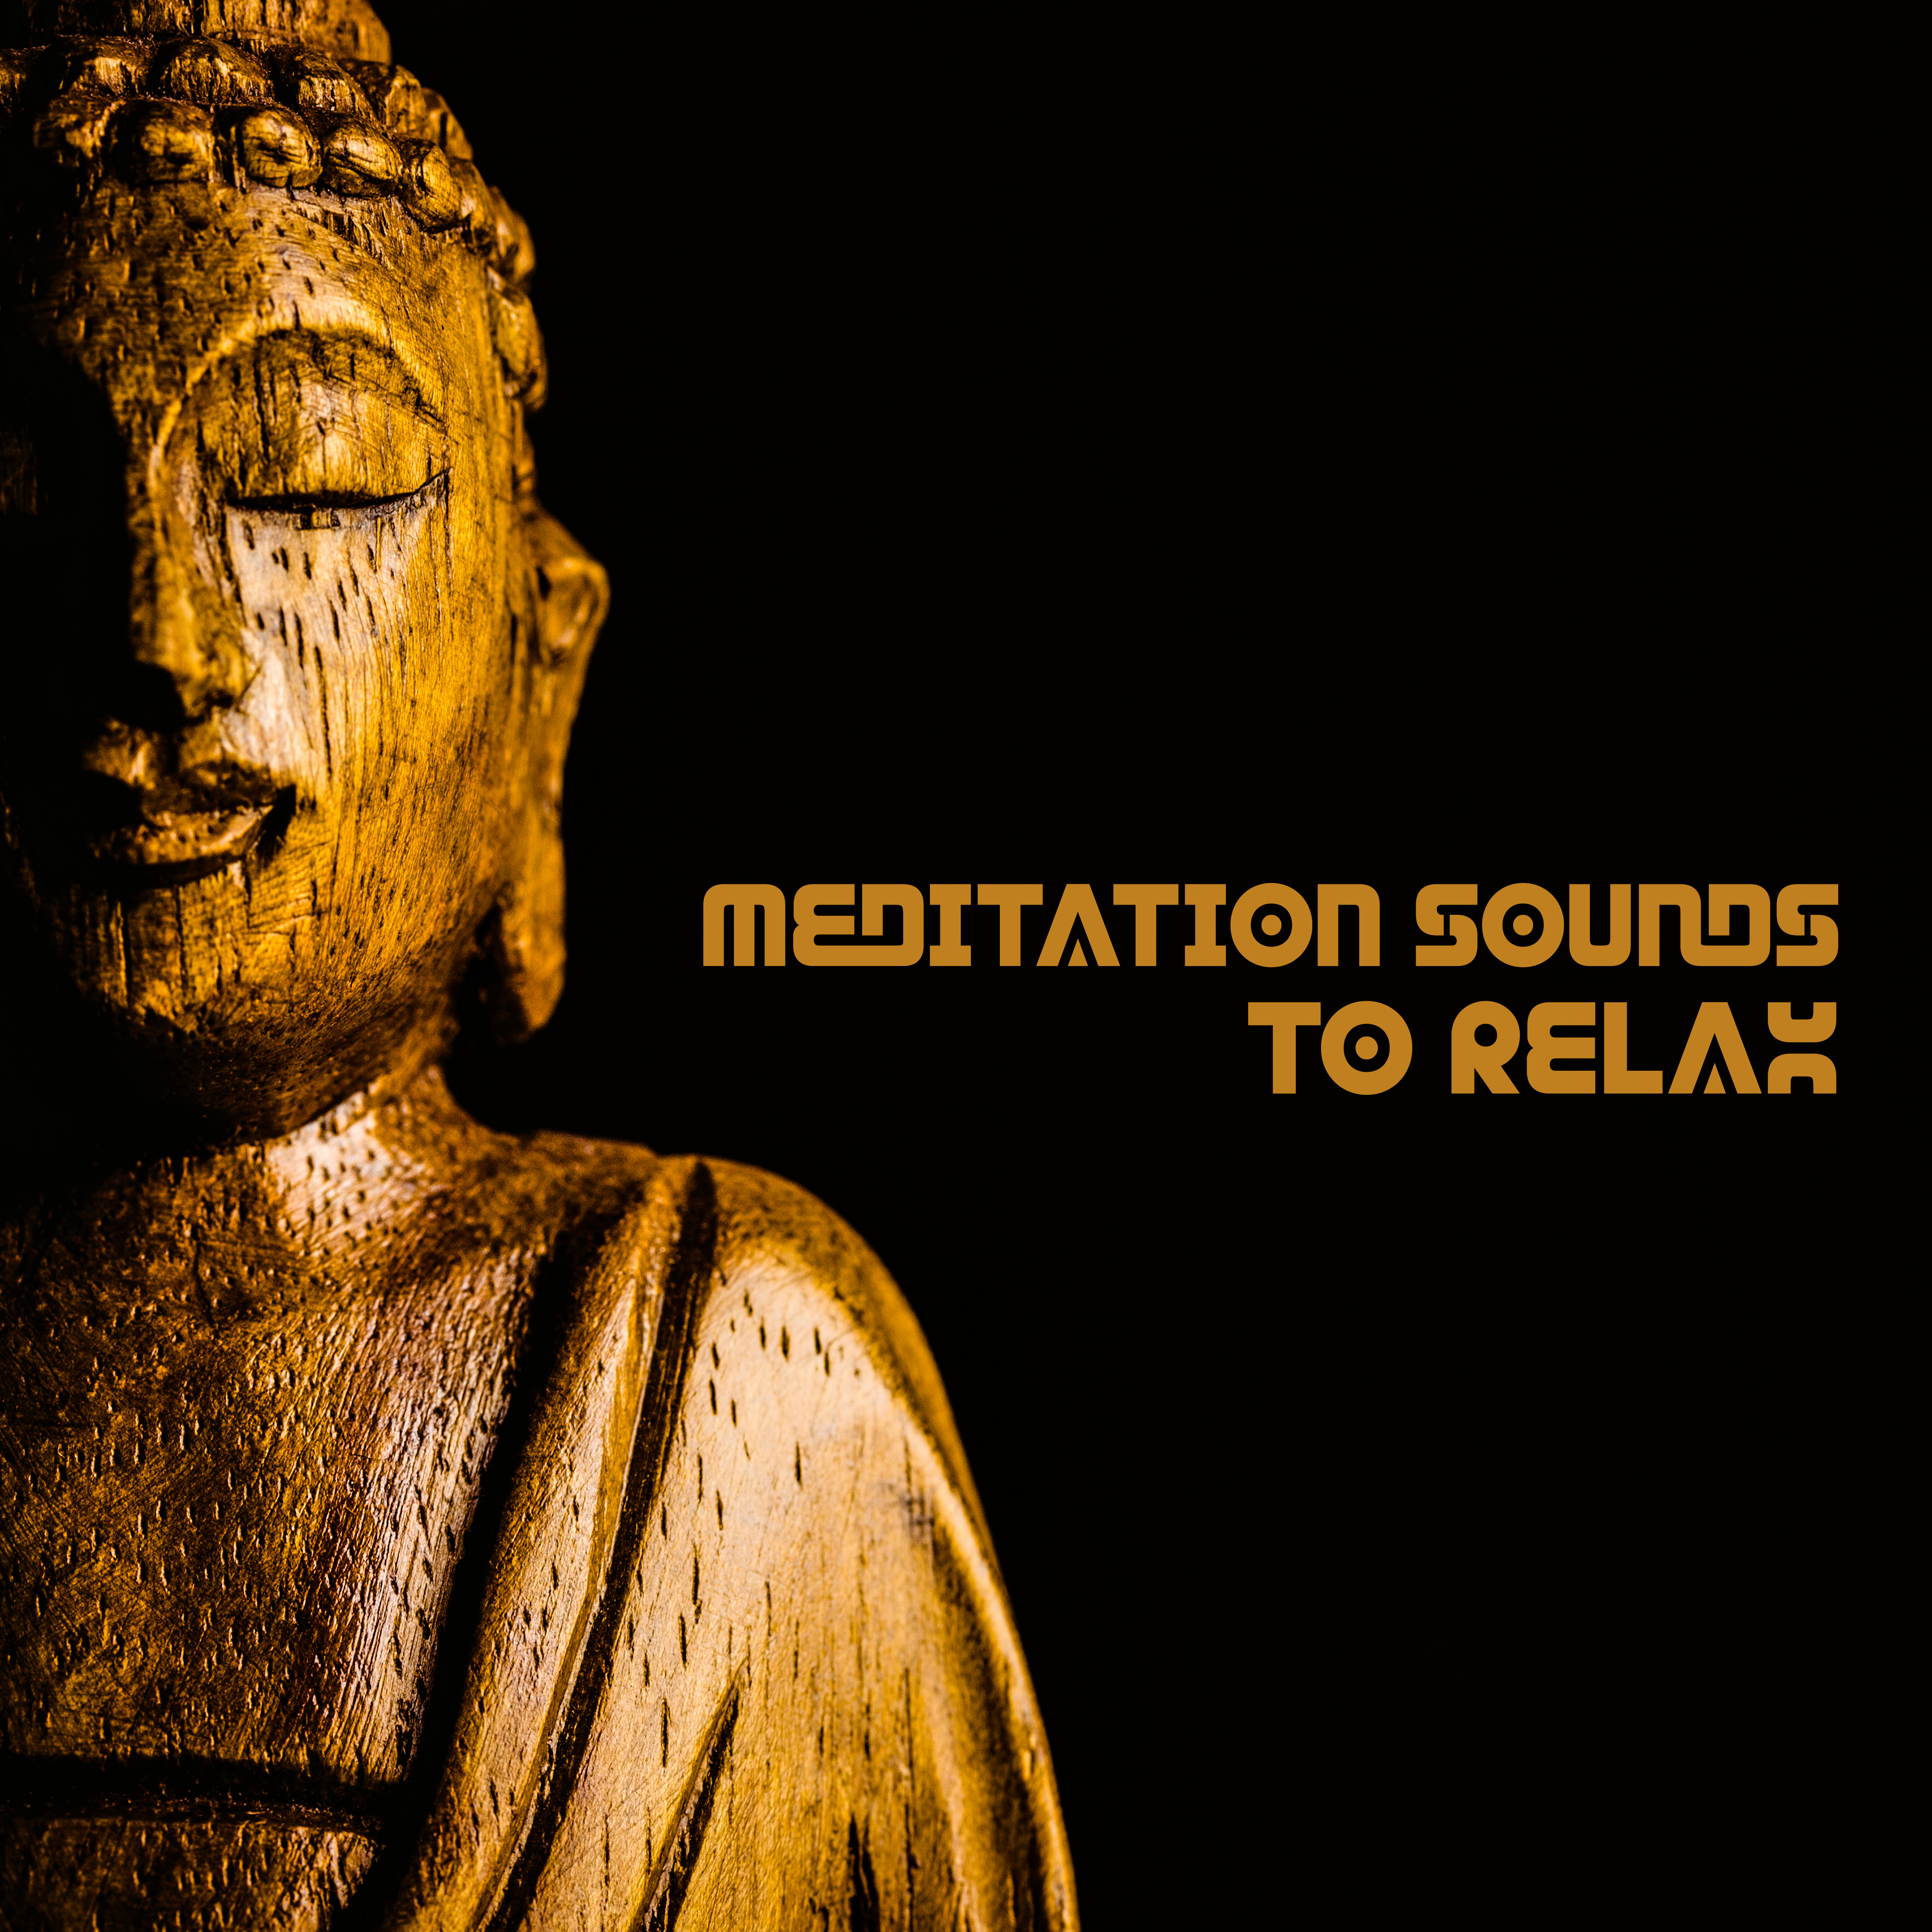 Meditation Sounds to Relax